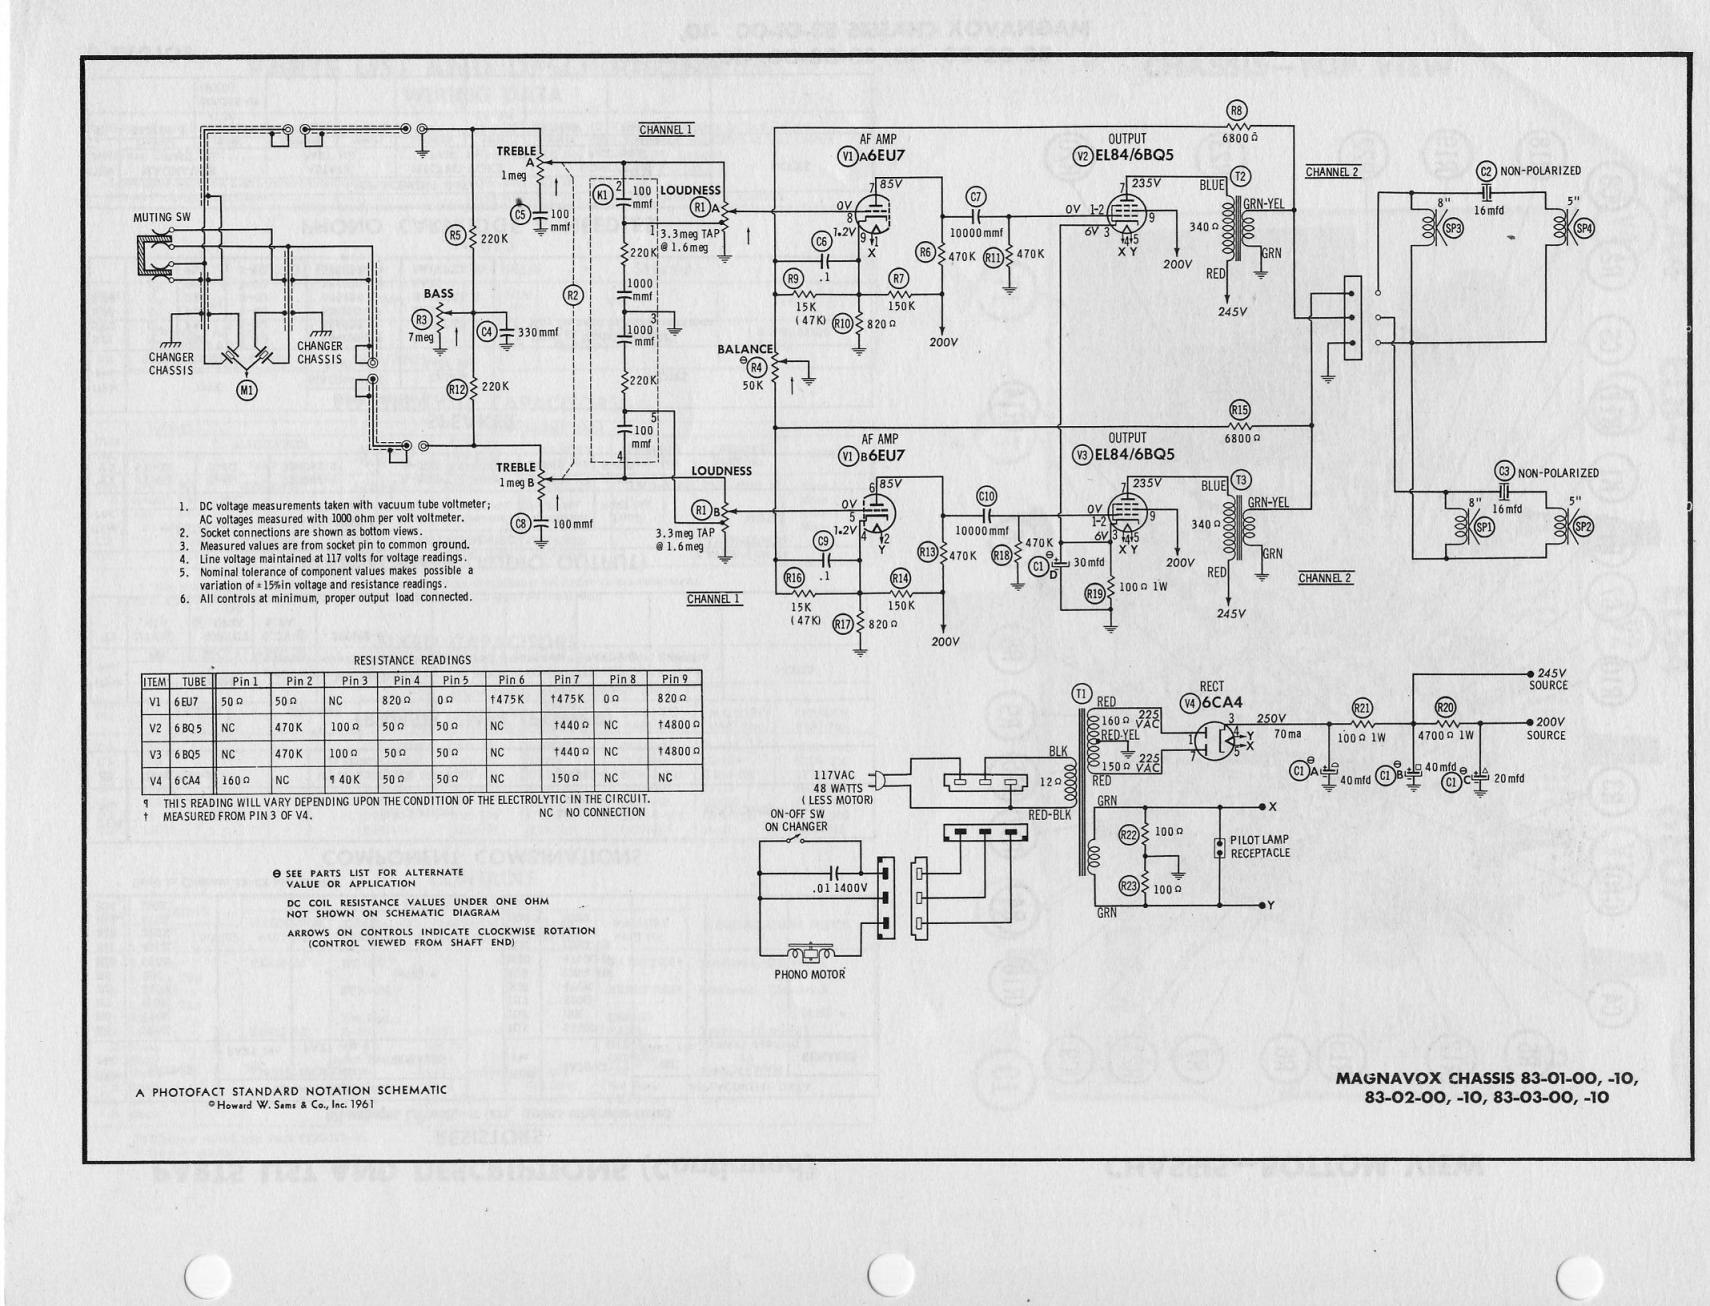 Here's the Sam's schematic of the 6EU7 input with a 6CA4 rectifier